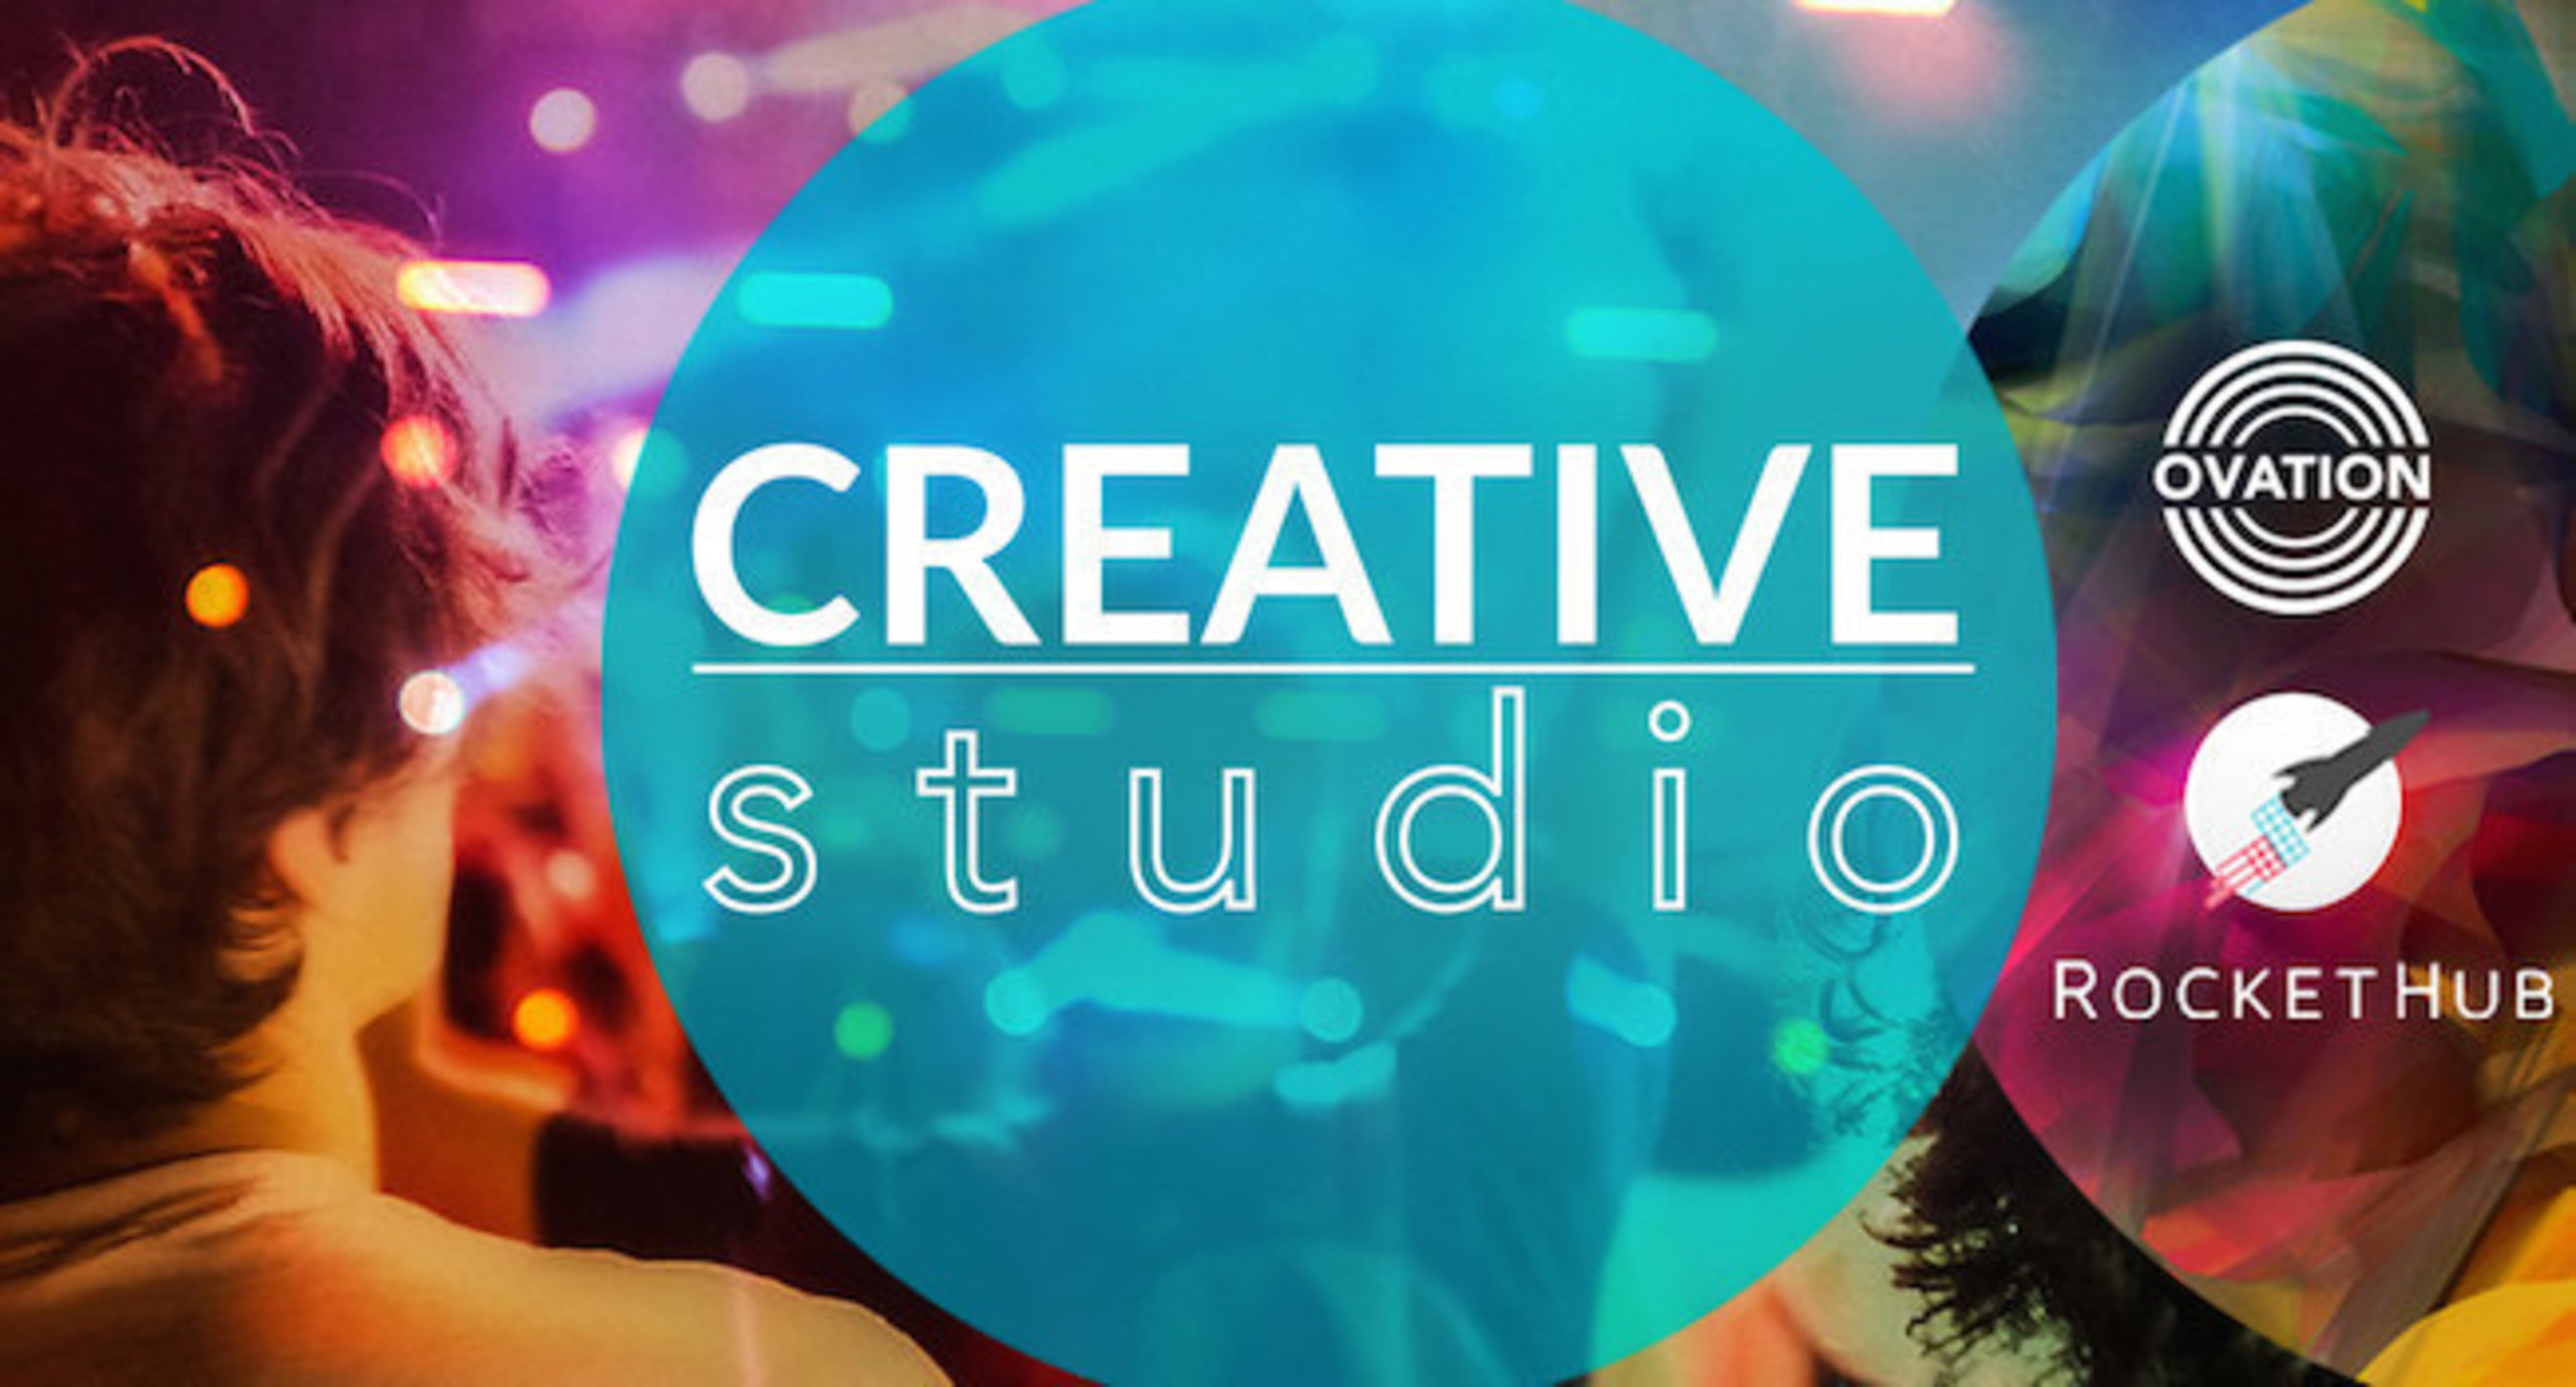 Ovation launches Creative Studio, a crowdfunding initiative for artists, in partnership with RocketHub